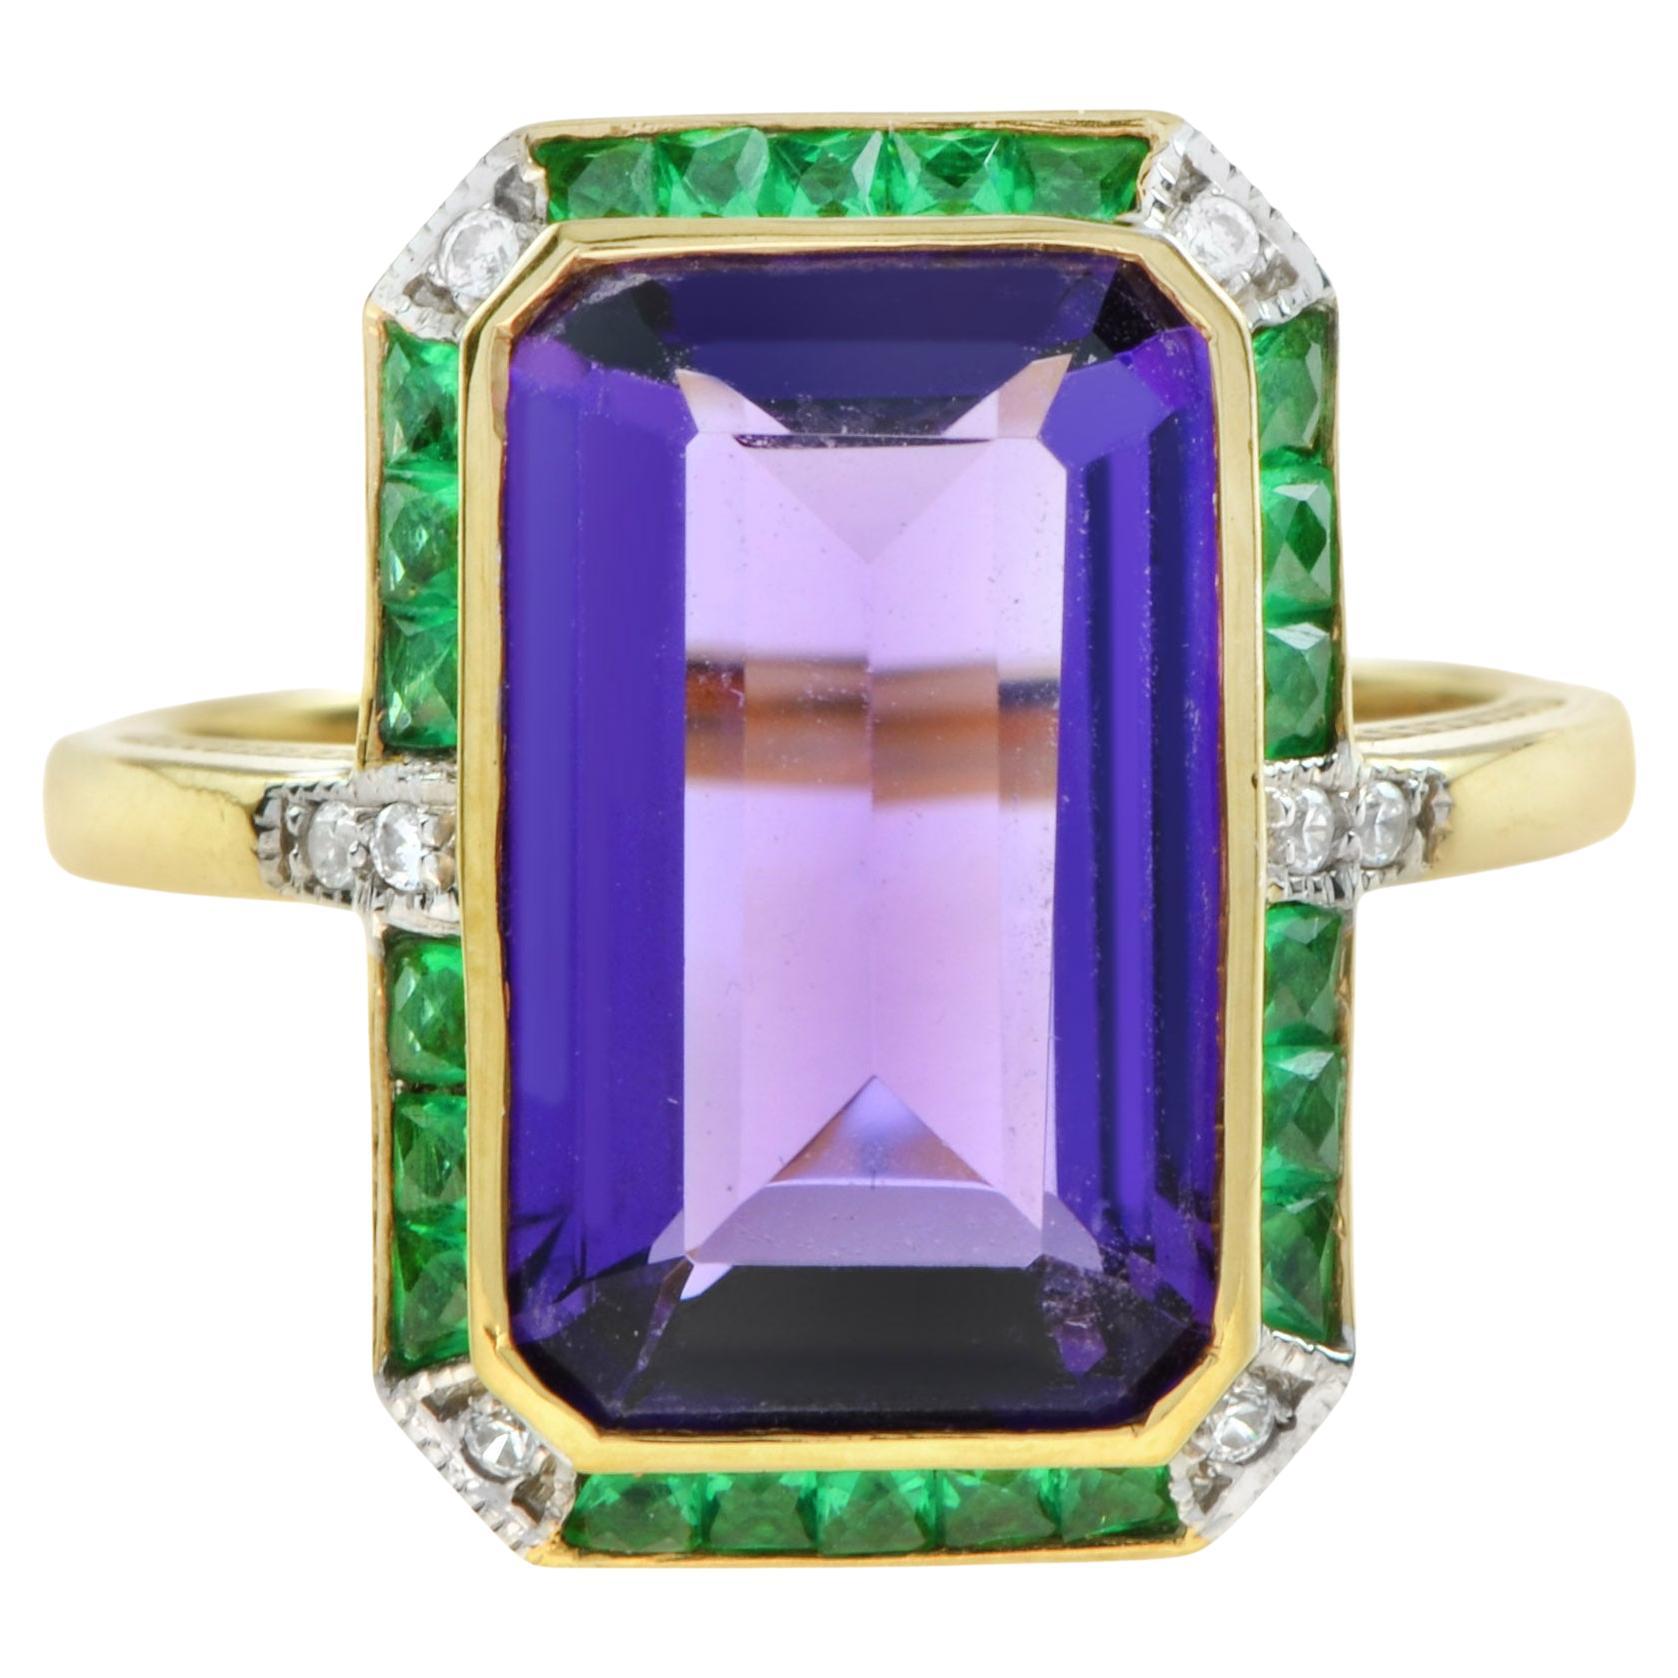 For Sale:  Emerald Cut Amethyst with Emerald and Diamond Art Deco Style Cocktail Ring